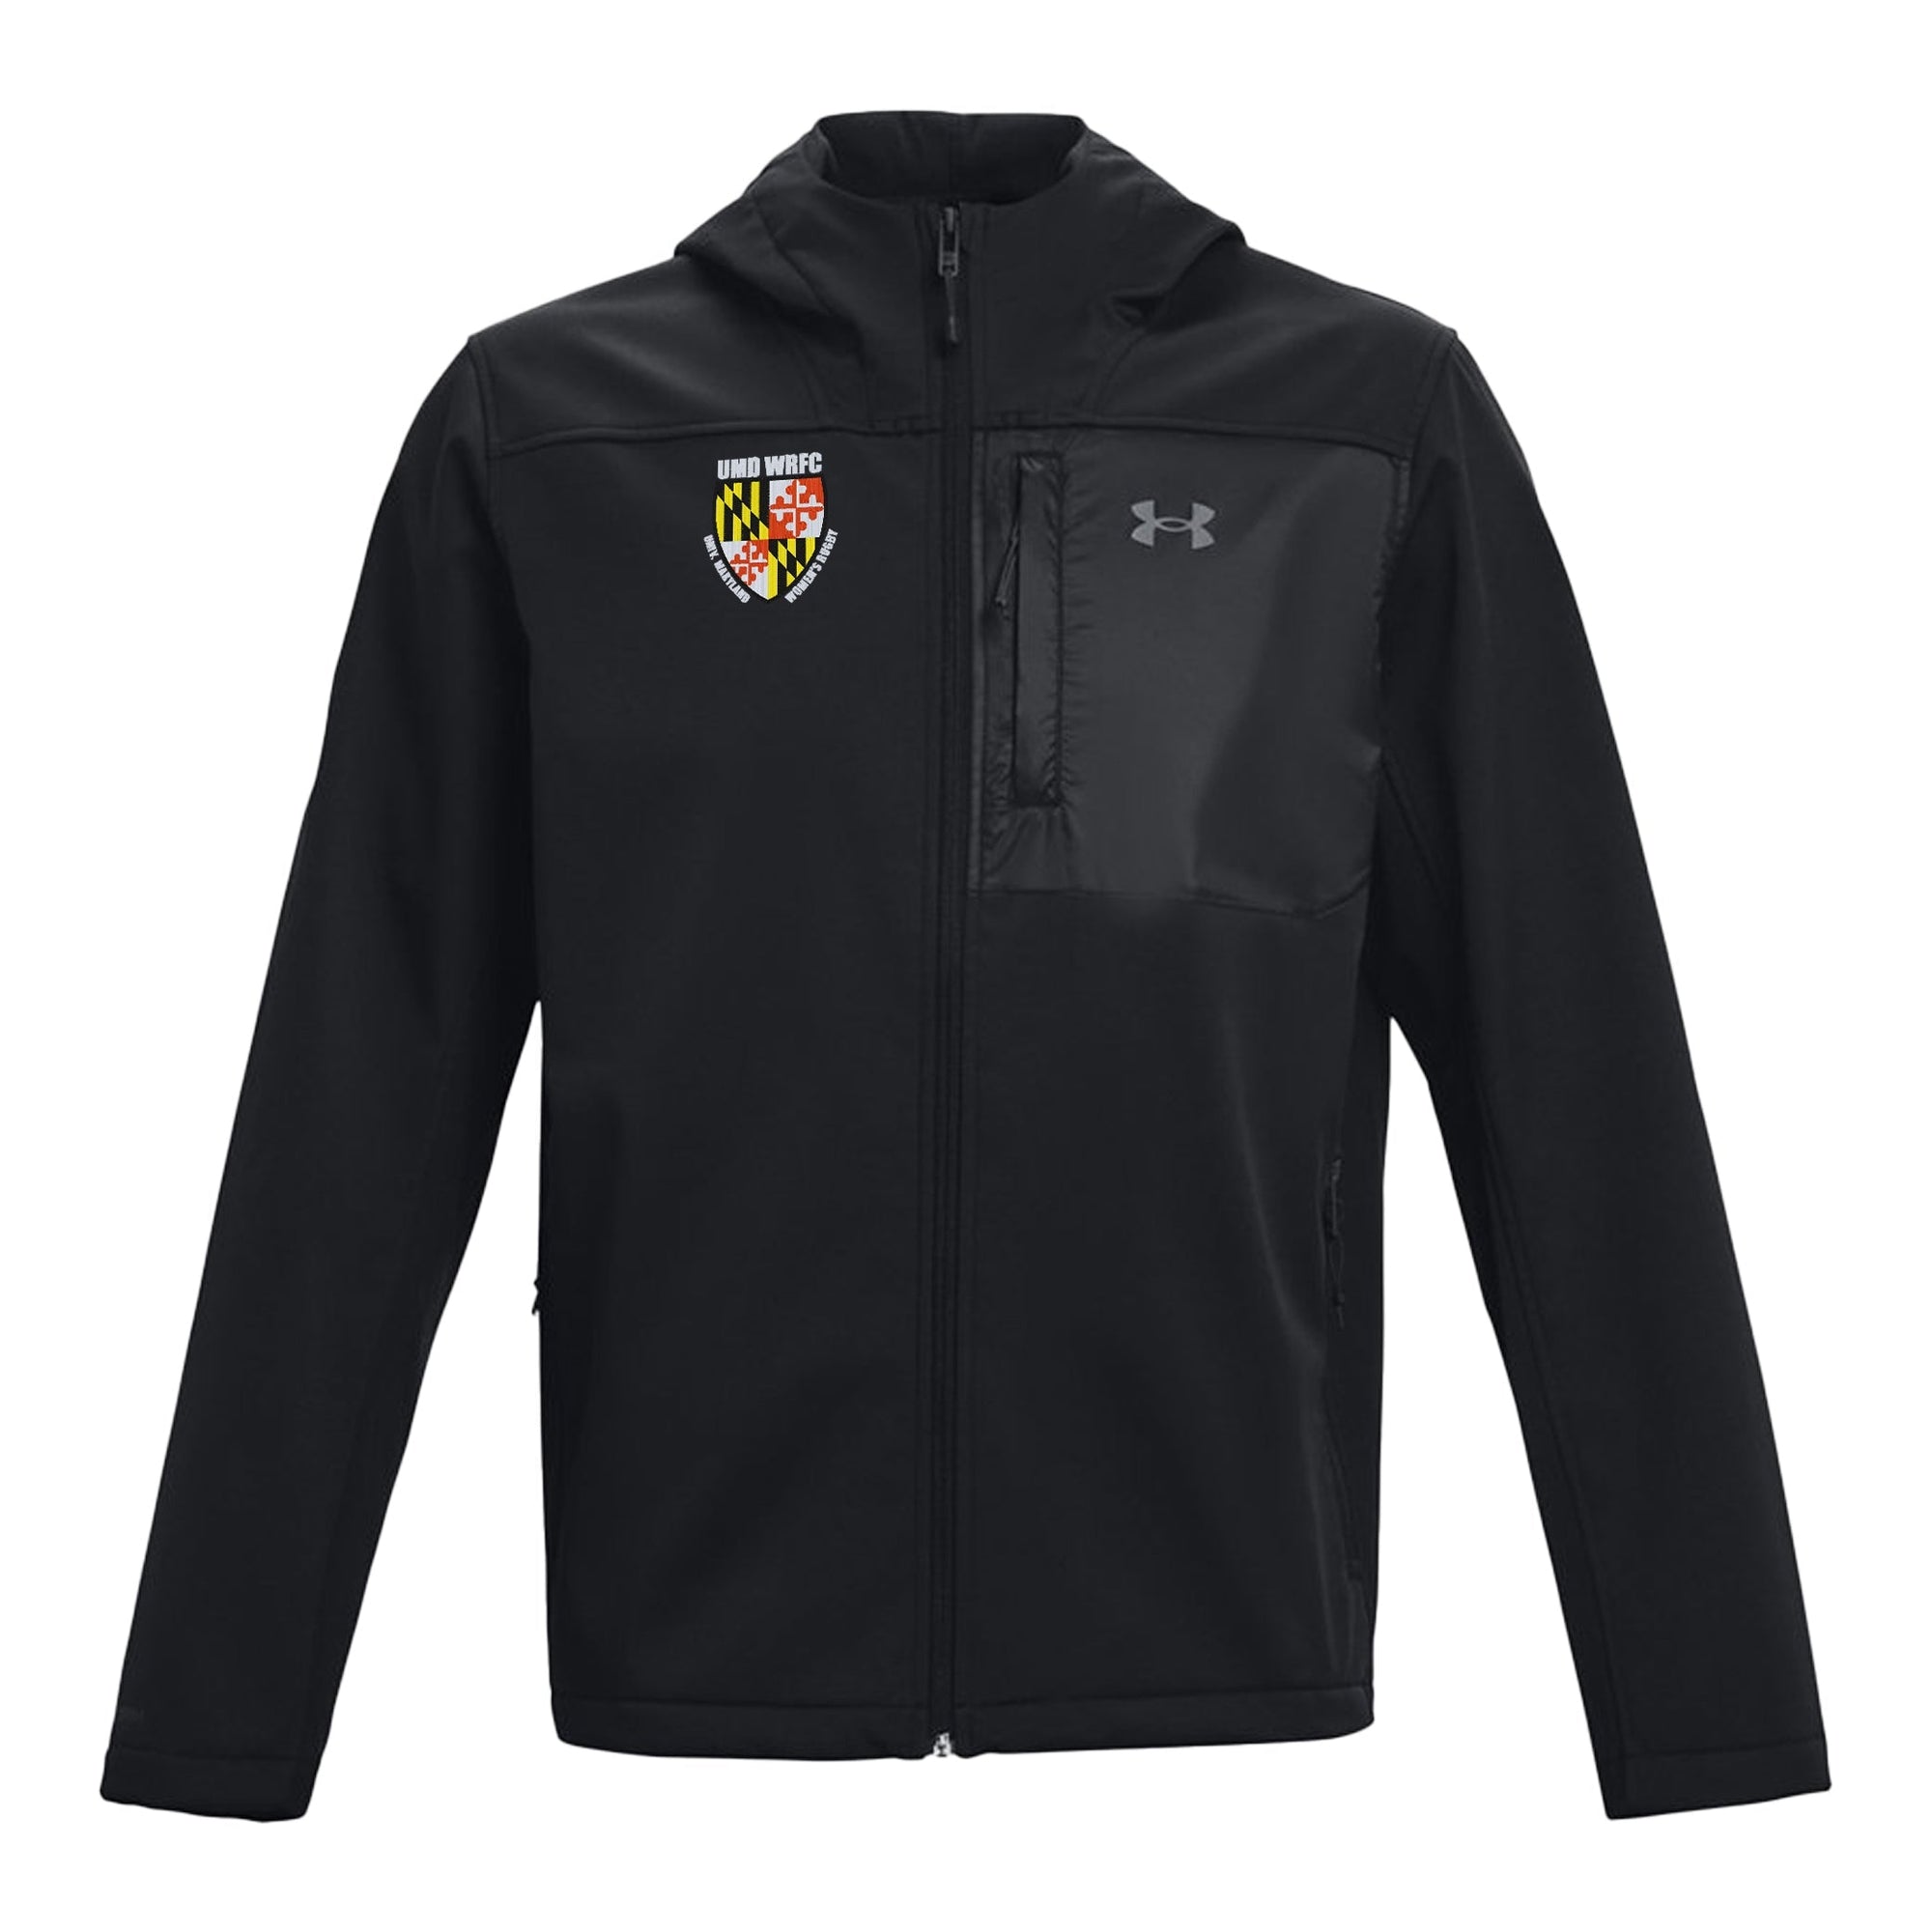 Rugby Imports UMD WRFC Coldgear Hooded Infrared Jacket